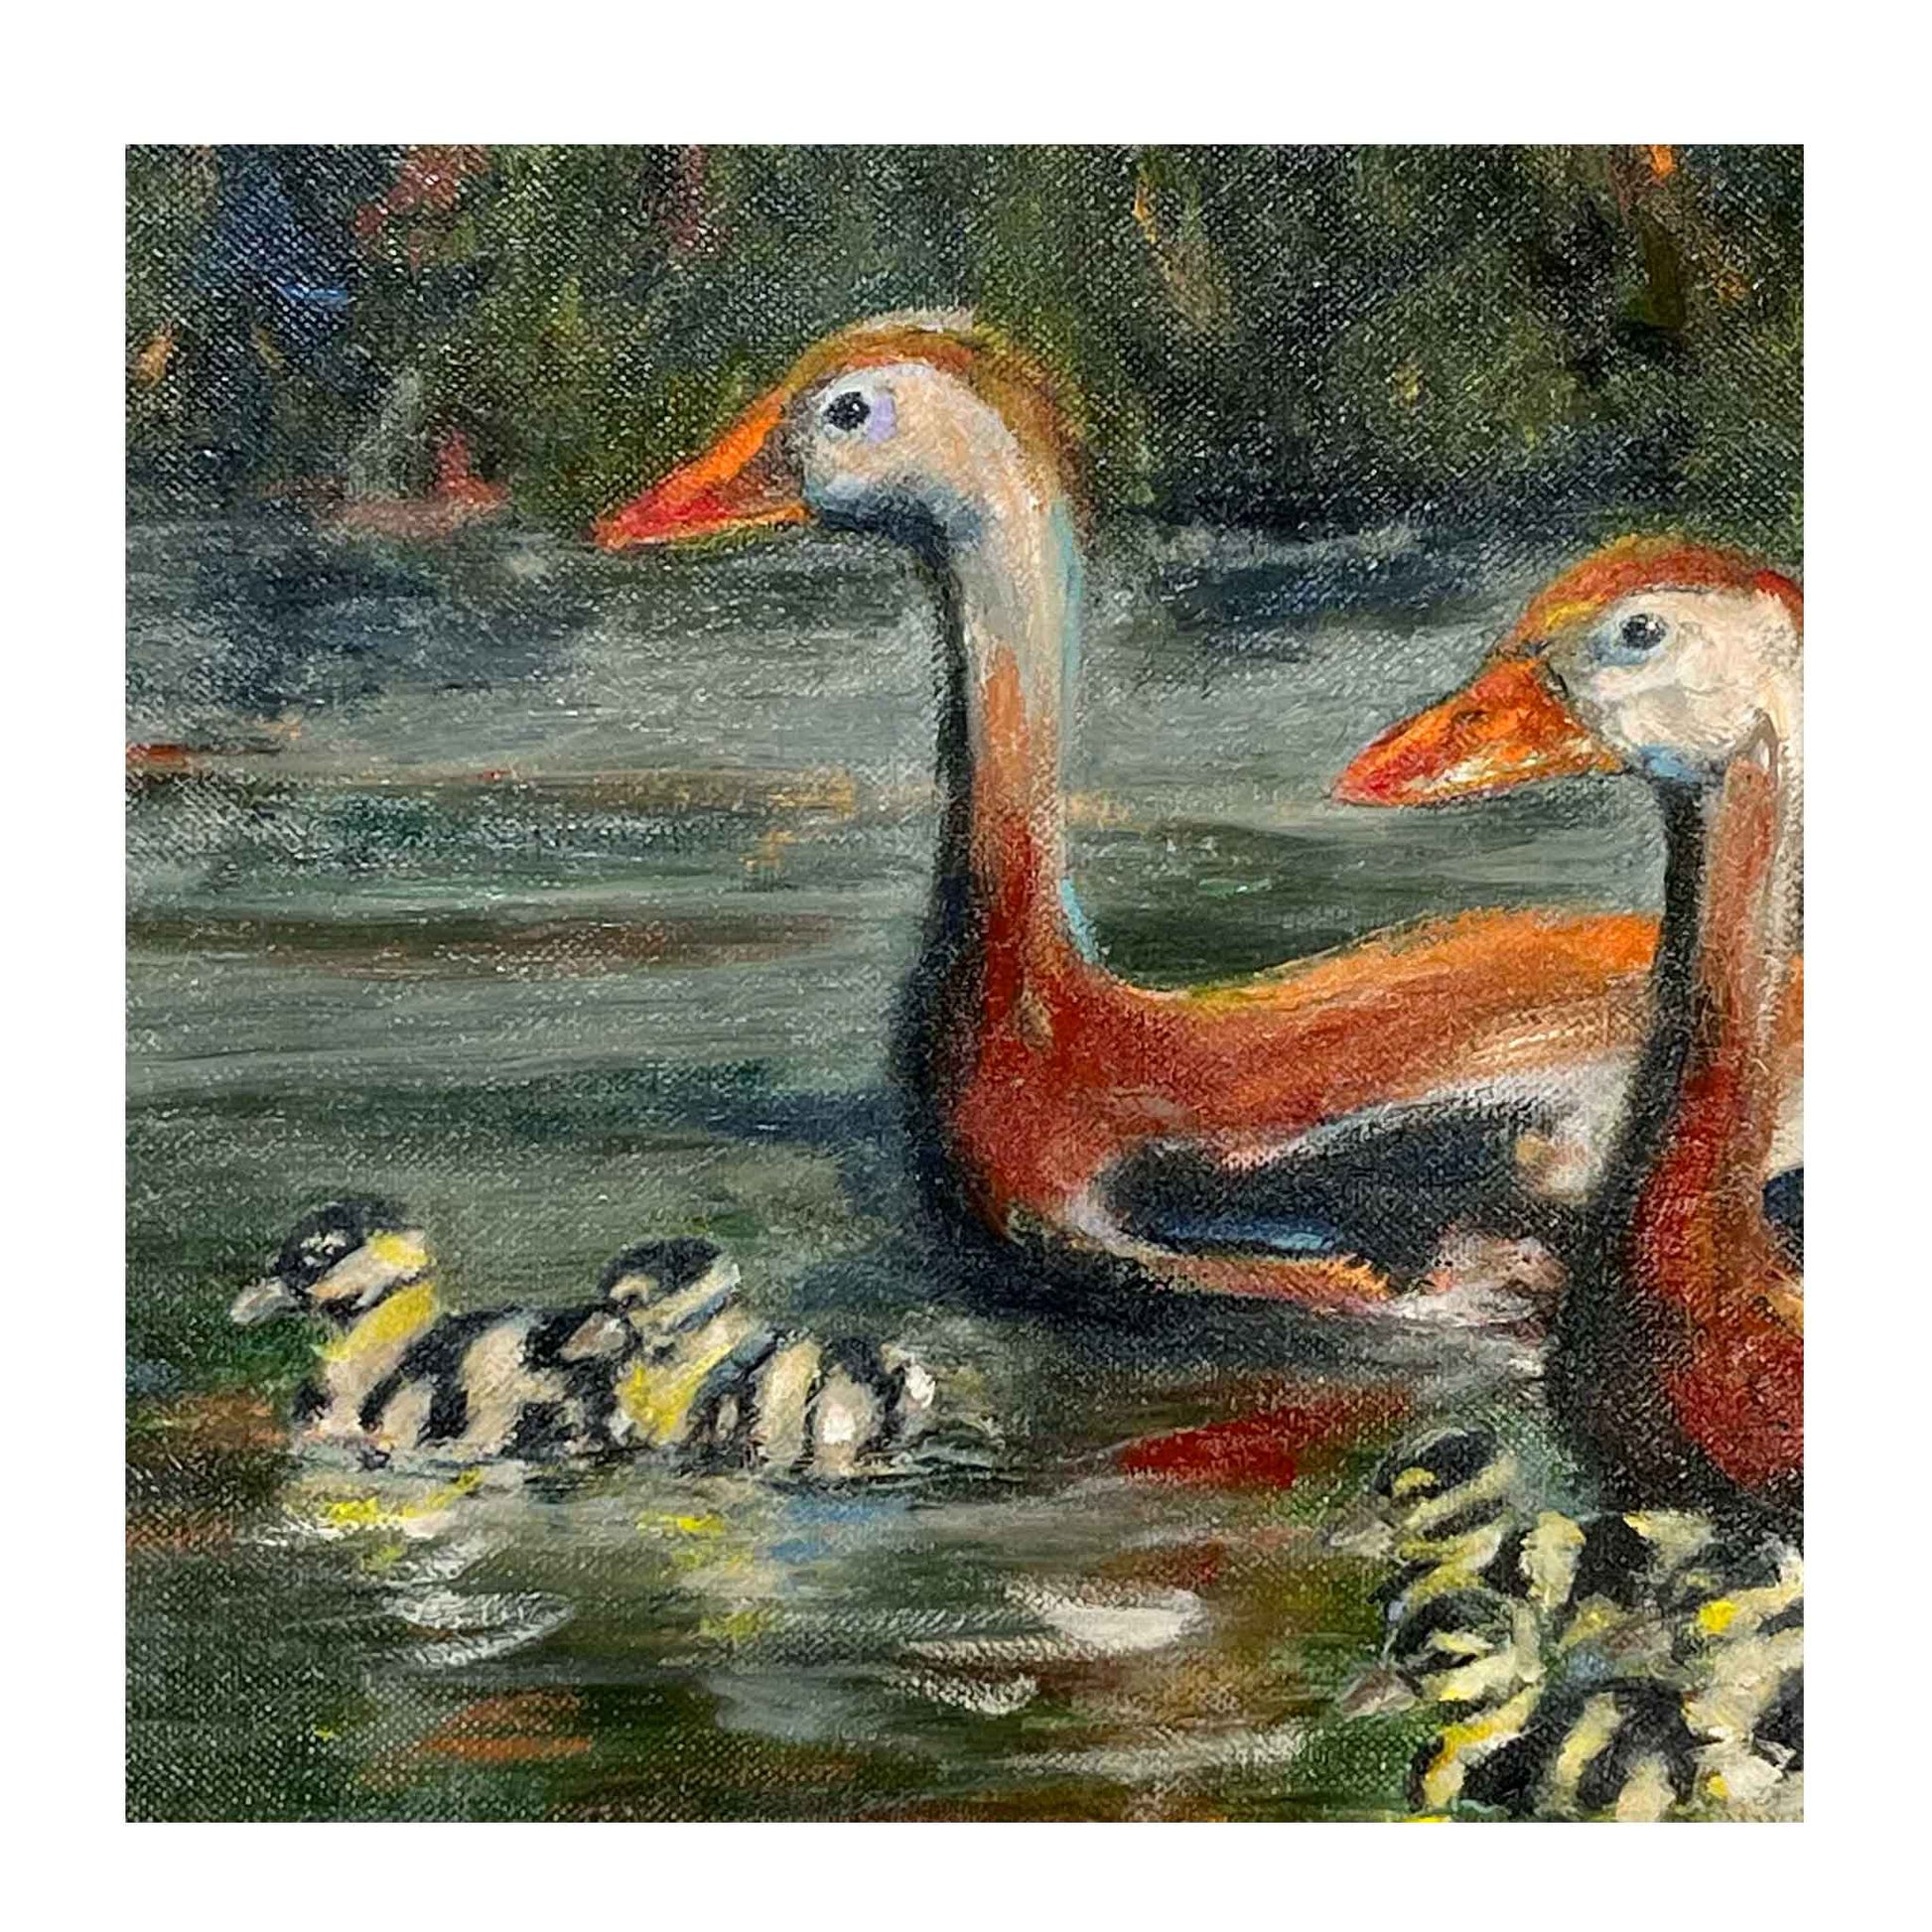 JRO Family Outing of Whistling Ducks Original Painting. A pair of Whistling Ducks with 5 tiny ducklings. The parents are a rusty brown with black and white markings contrast with their orange beaks . While the ducklings are yellow, black and white. Wild bird painting of ducks and ducklings. Swimming in stream. Green foliage tumbles to the water's edge. 16" x 21" in a stunning wooden frame.